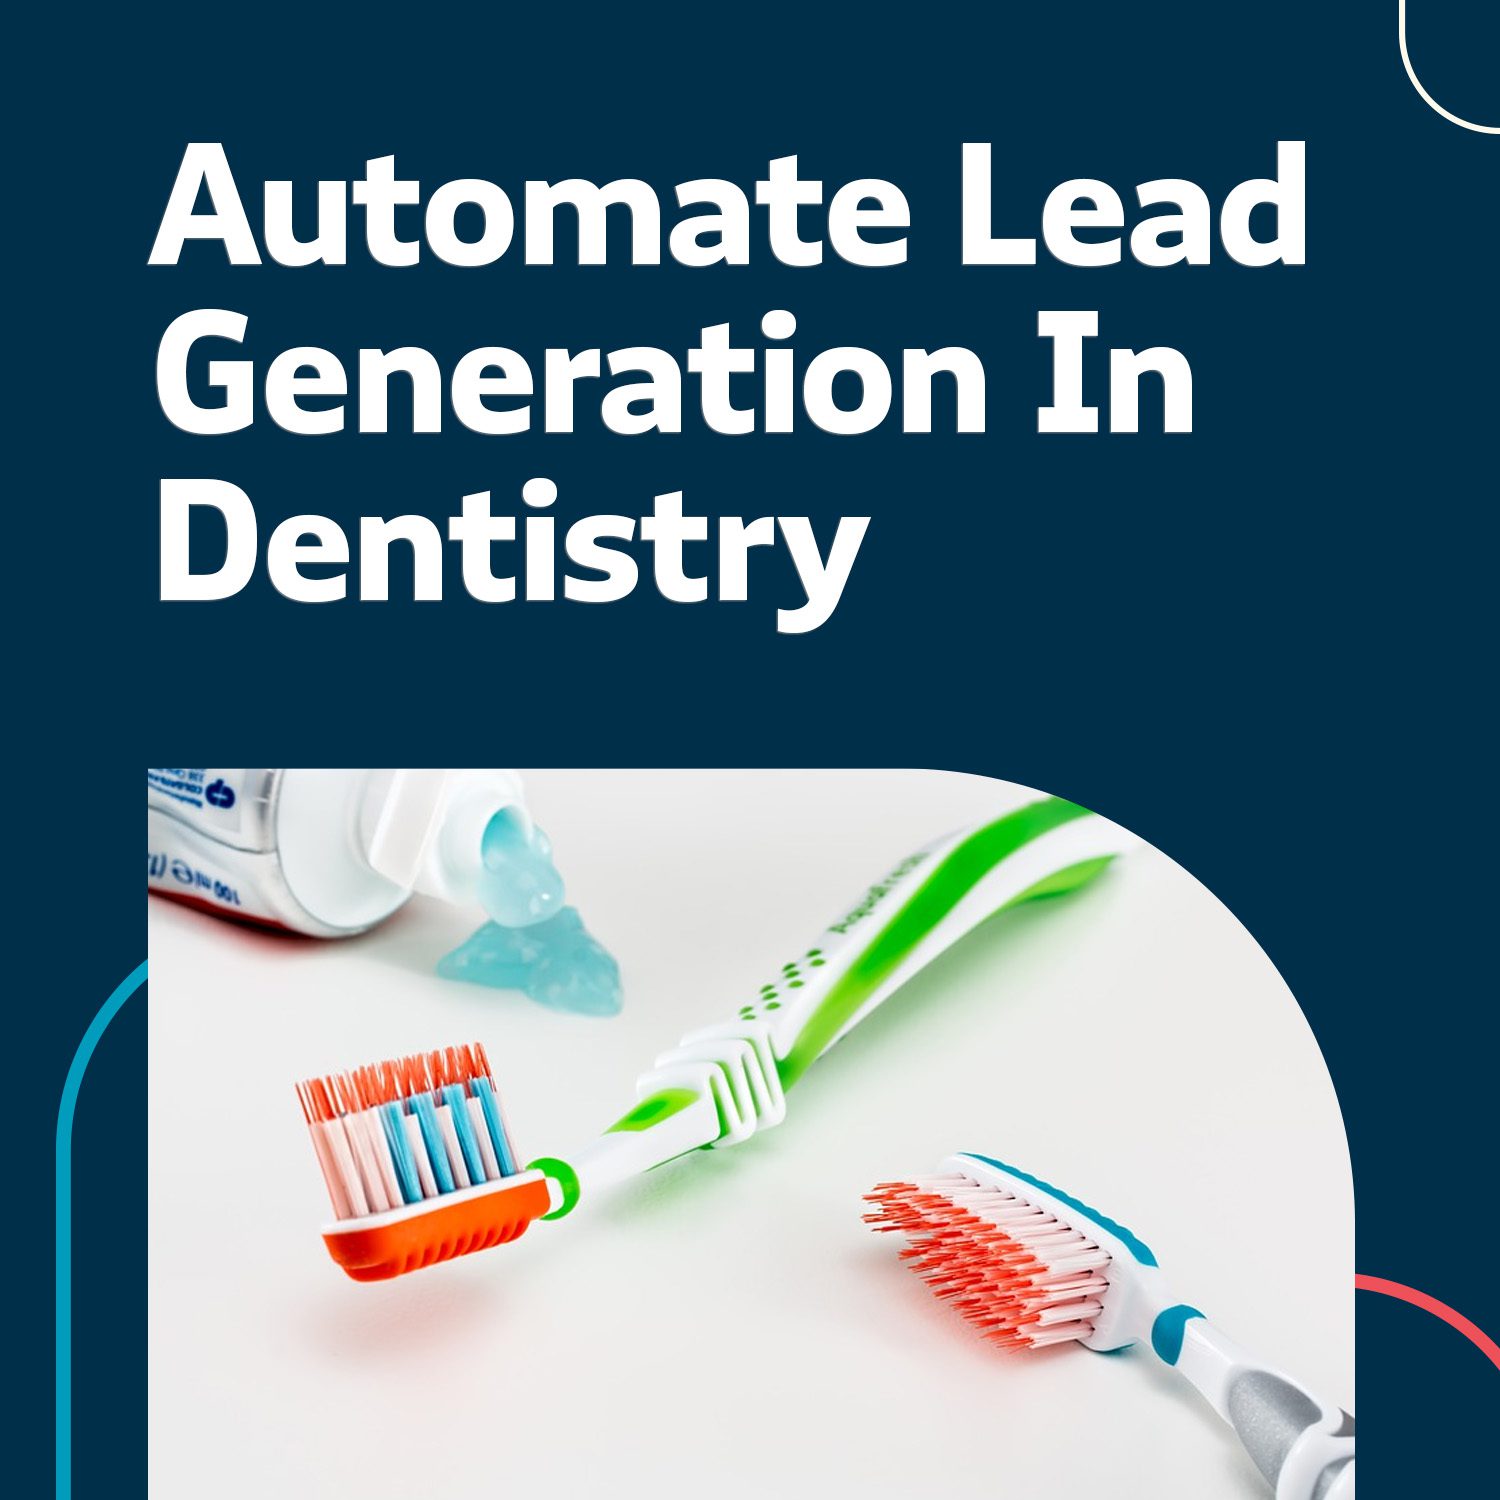 Automating Lead Generation in Dentistry